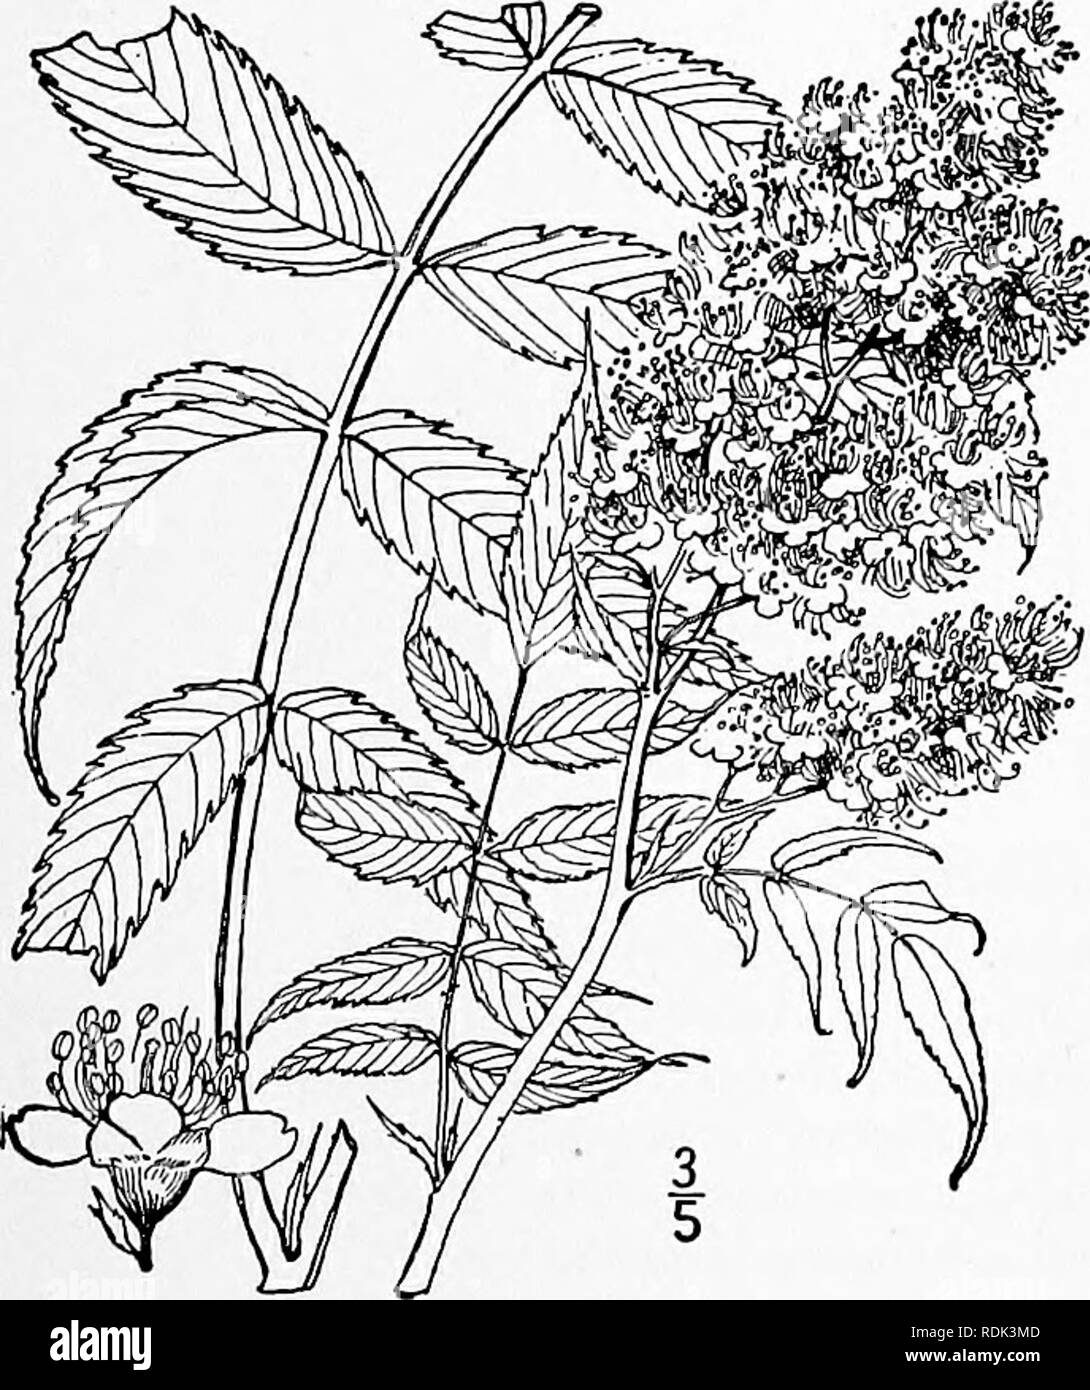 . An illustrated flora of the northern United States, Canada and the British possessions, from Newfoundland to the parallel of the southern boundary of Virginia, and from the Atlantic Ocean westward to the 102d meridian. Botany; Botany. 4. SCHIZONOTUS Lindl. Introd. Nat. Syst. 81. 1830. Shrubs, with odd-pinnate leaves, the large stipules conspicuous. Flowers perfect, in terminal panicles. Calyx-tube hemispheric, its 5 lobes imbricated, early reflexed. Petals 5, imbricated. Stamens numerous, borne on the margin of the disk. Pistils mostly 5, opposite the calyx-lobes, connate below; styles termi Stock Photo